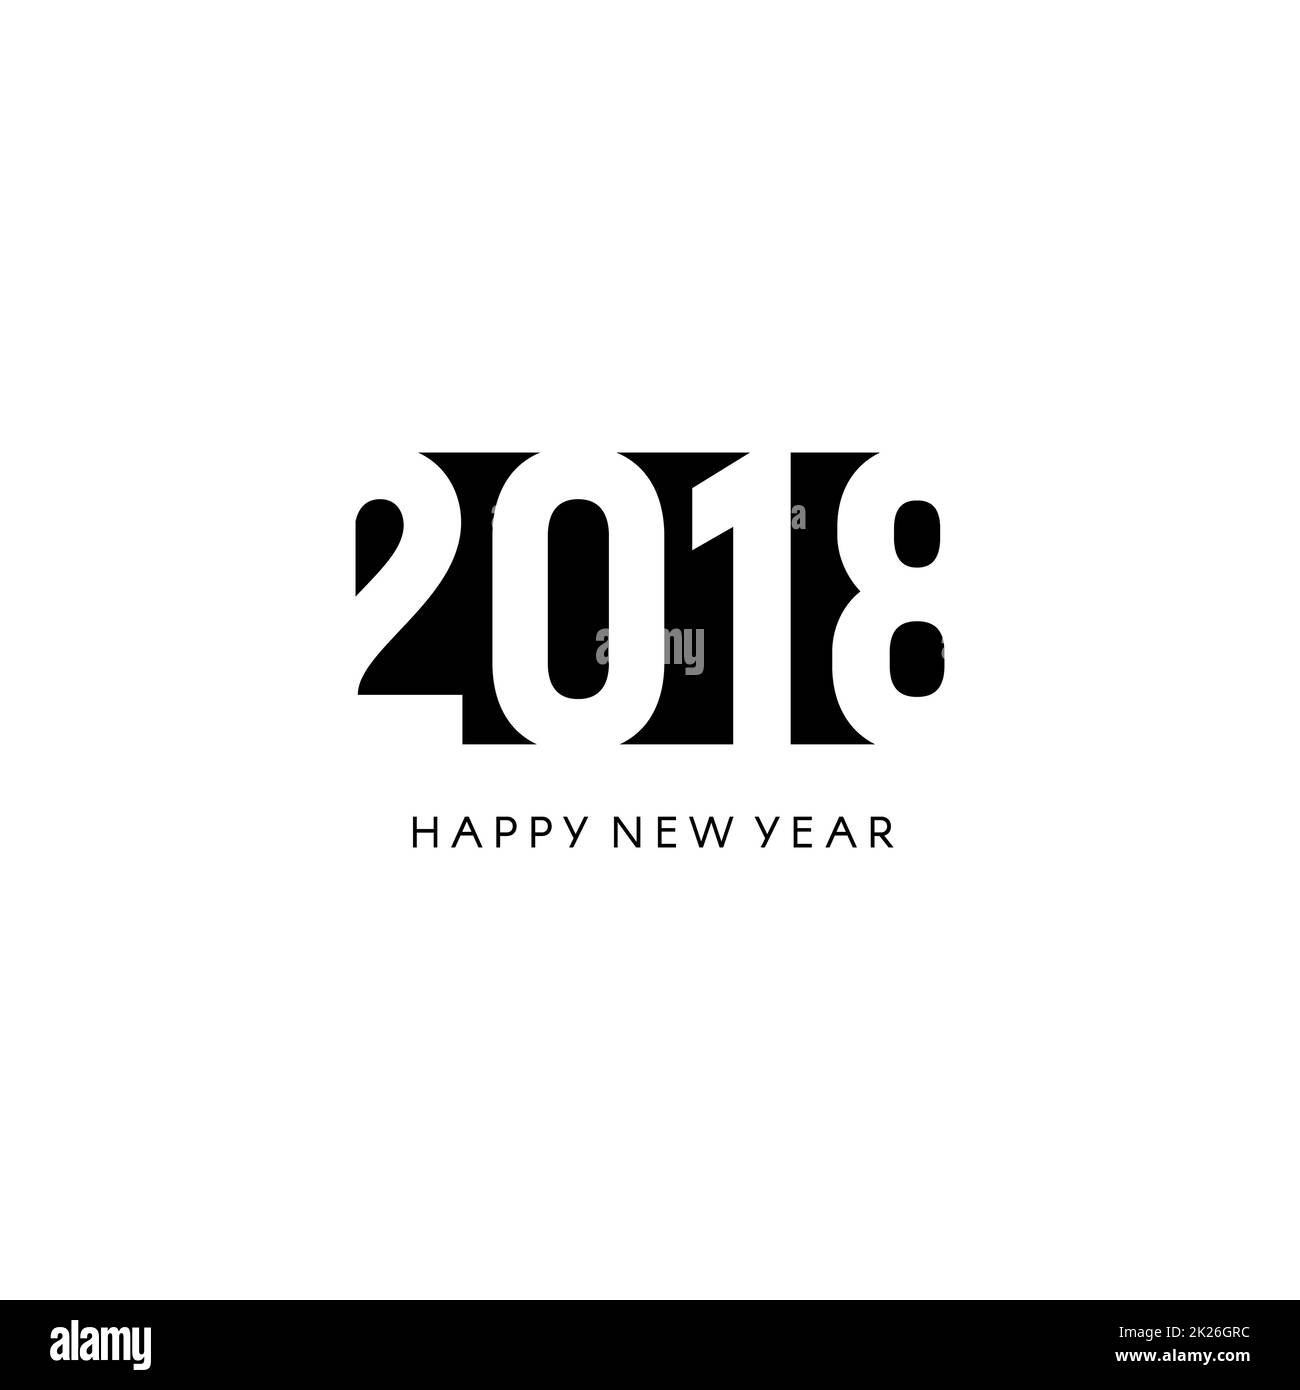 Happy new 2018 year sign. Black negative space vector logo. Stock Photo